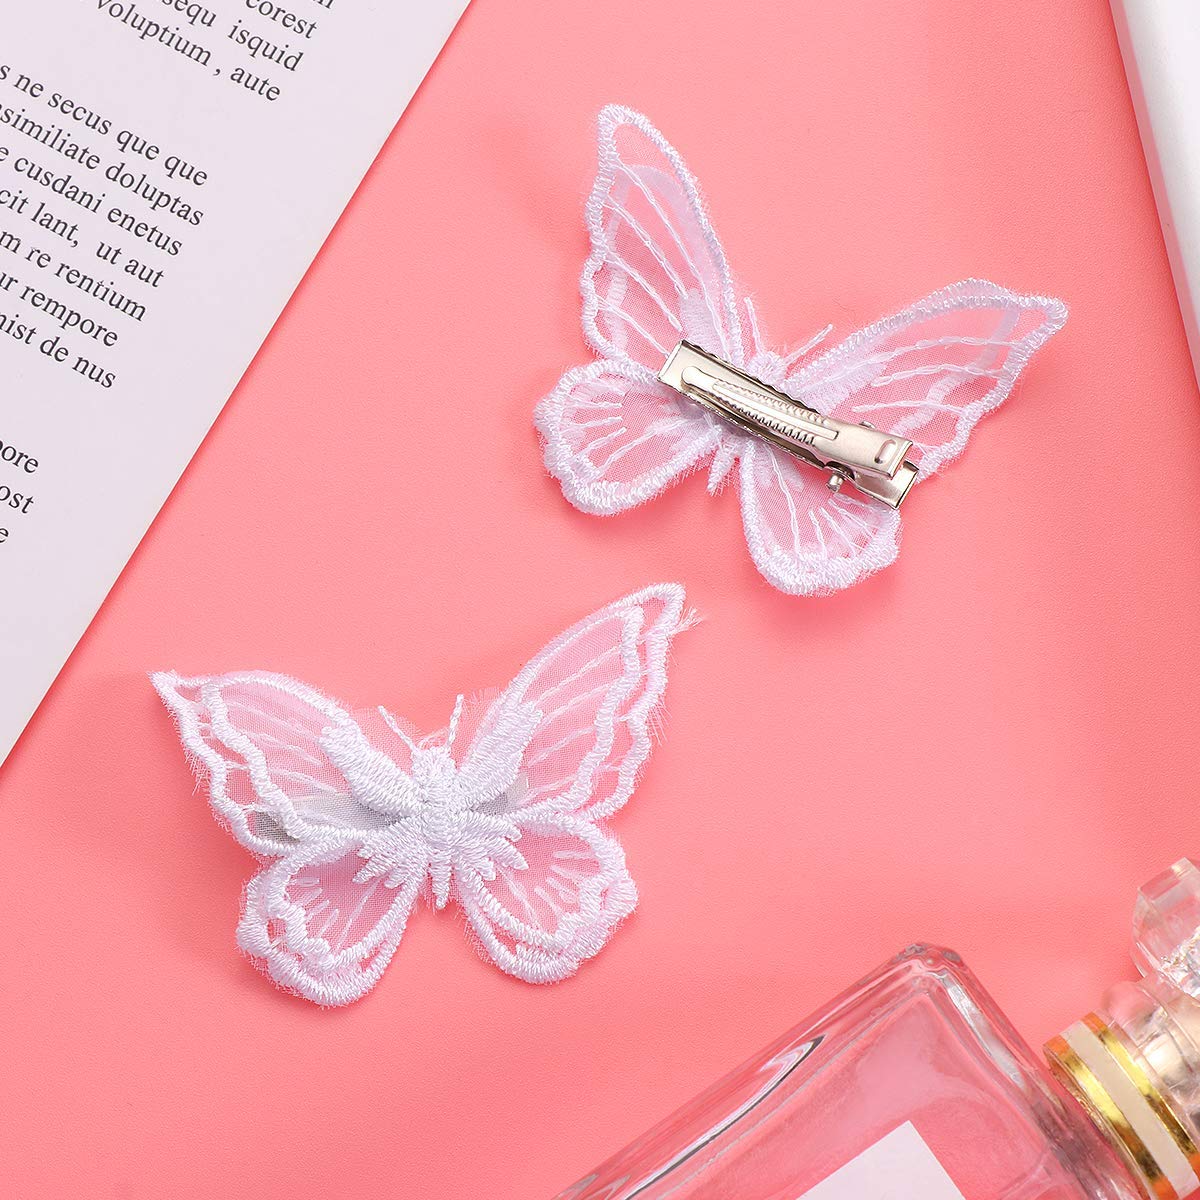 Yellow Chimes Hair Clips for Girls 4 Pcs Hairclips Emrioded Mesh Butterfly Hair Clips for Kids Hair Accessories for Toddlers and Kids